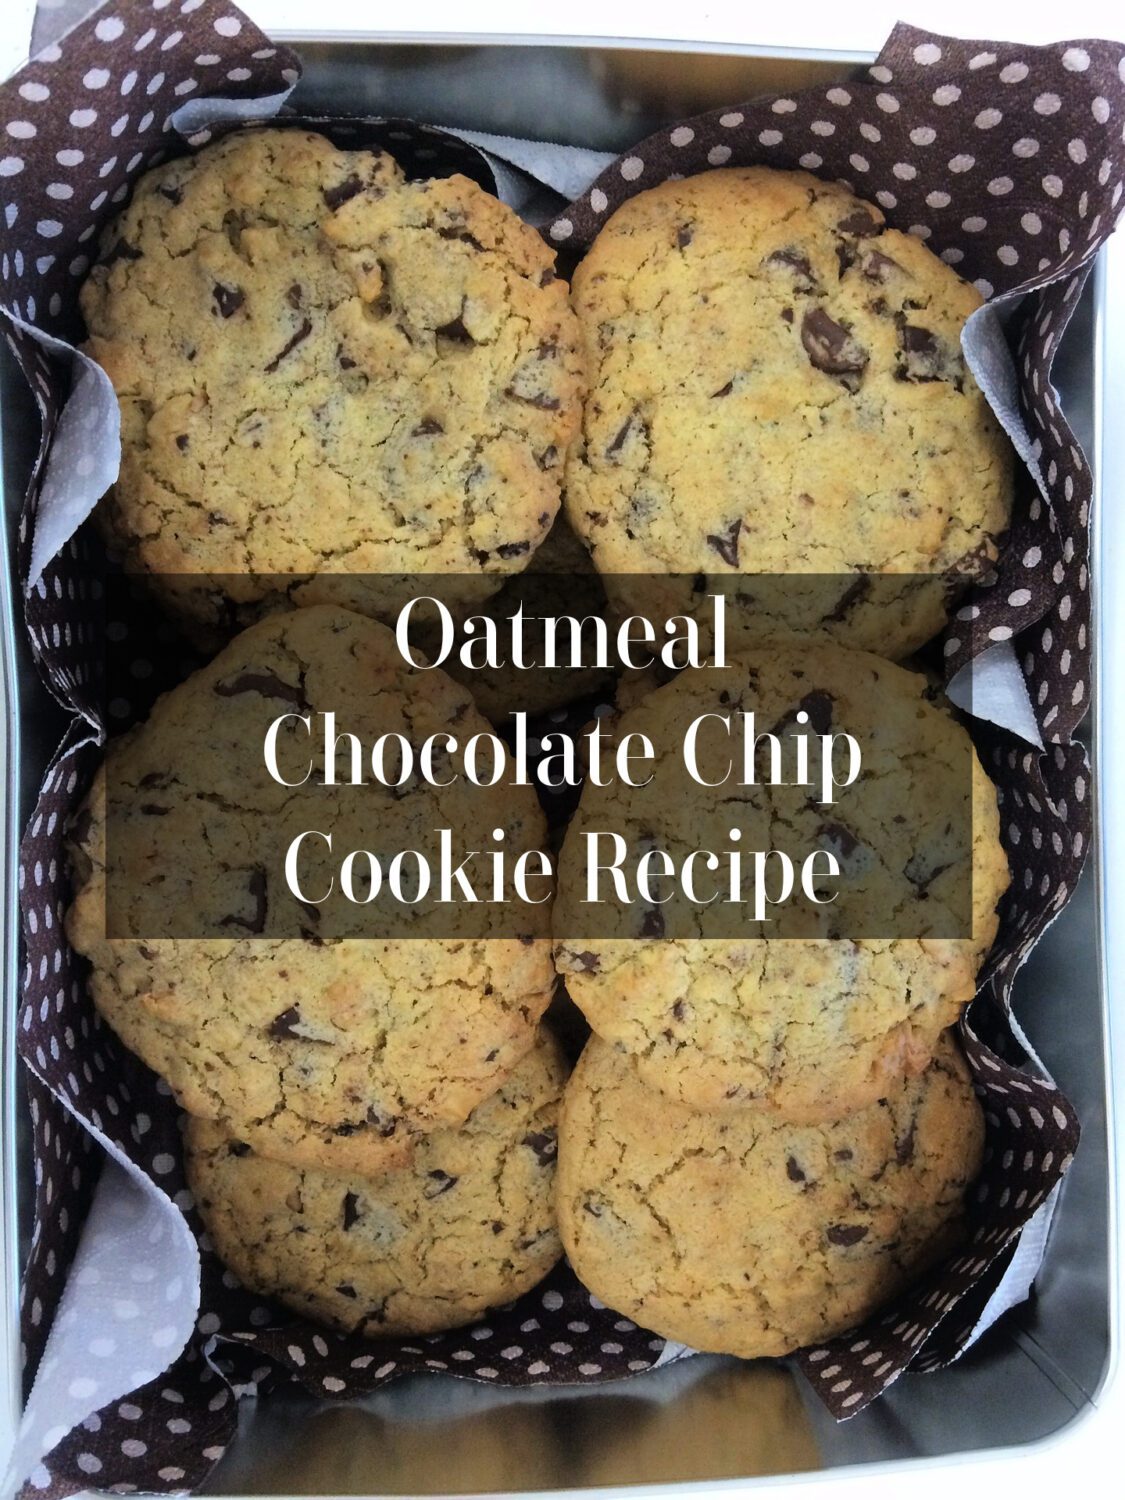 https://simplelifemom.com/wp-content/uploads/2023/05/Best-Oatmeal-Chocolate-Chip-Cookie-Recipe.jpg